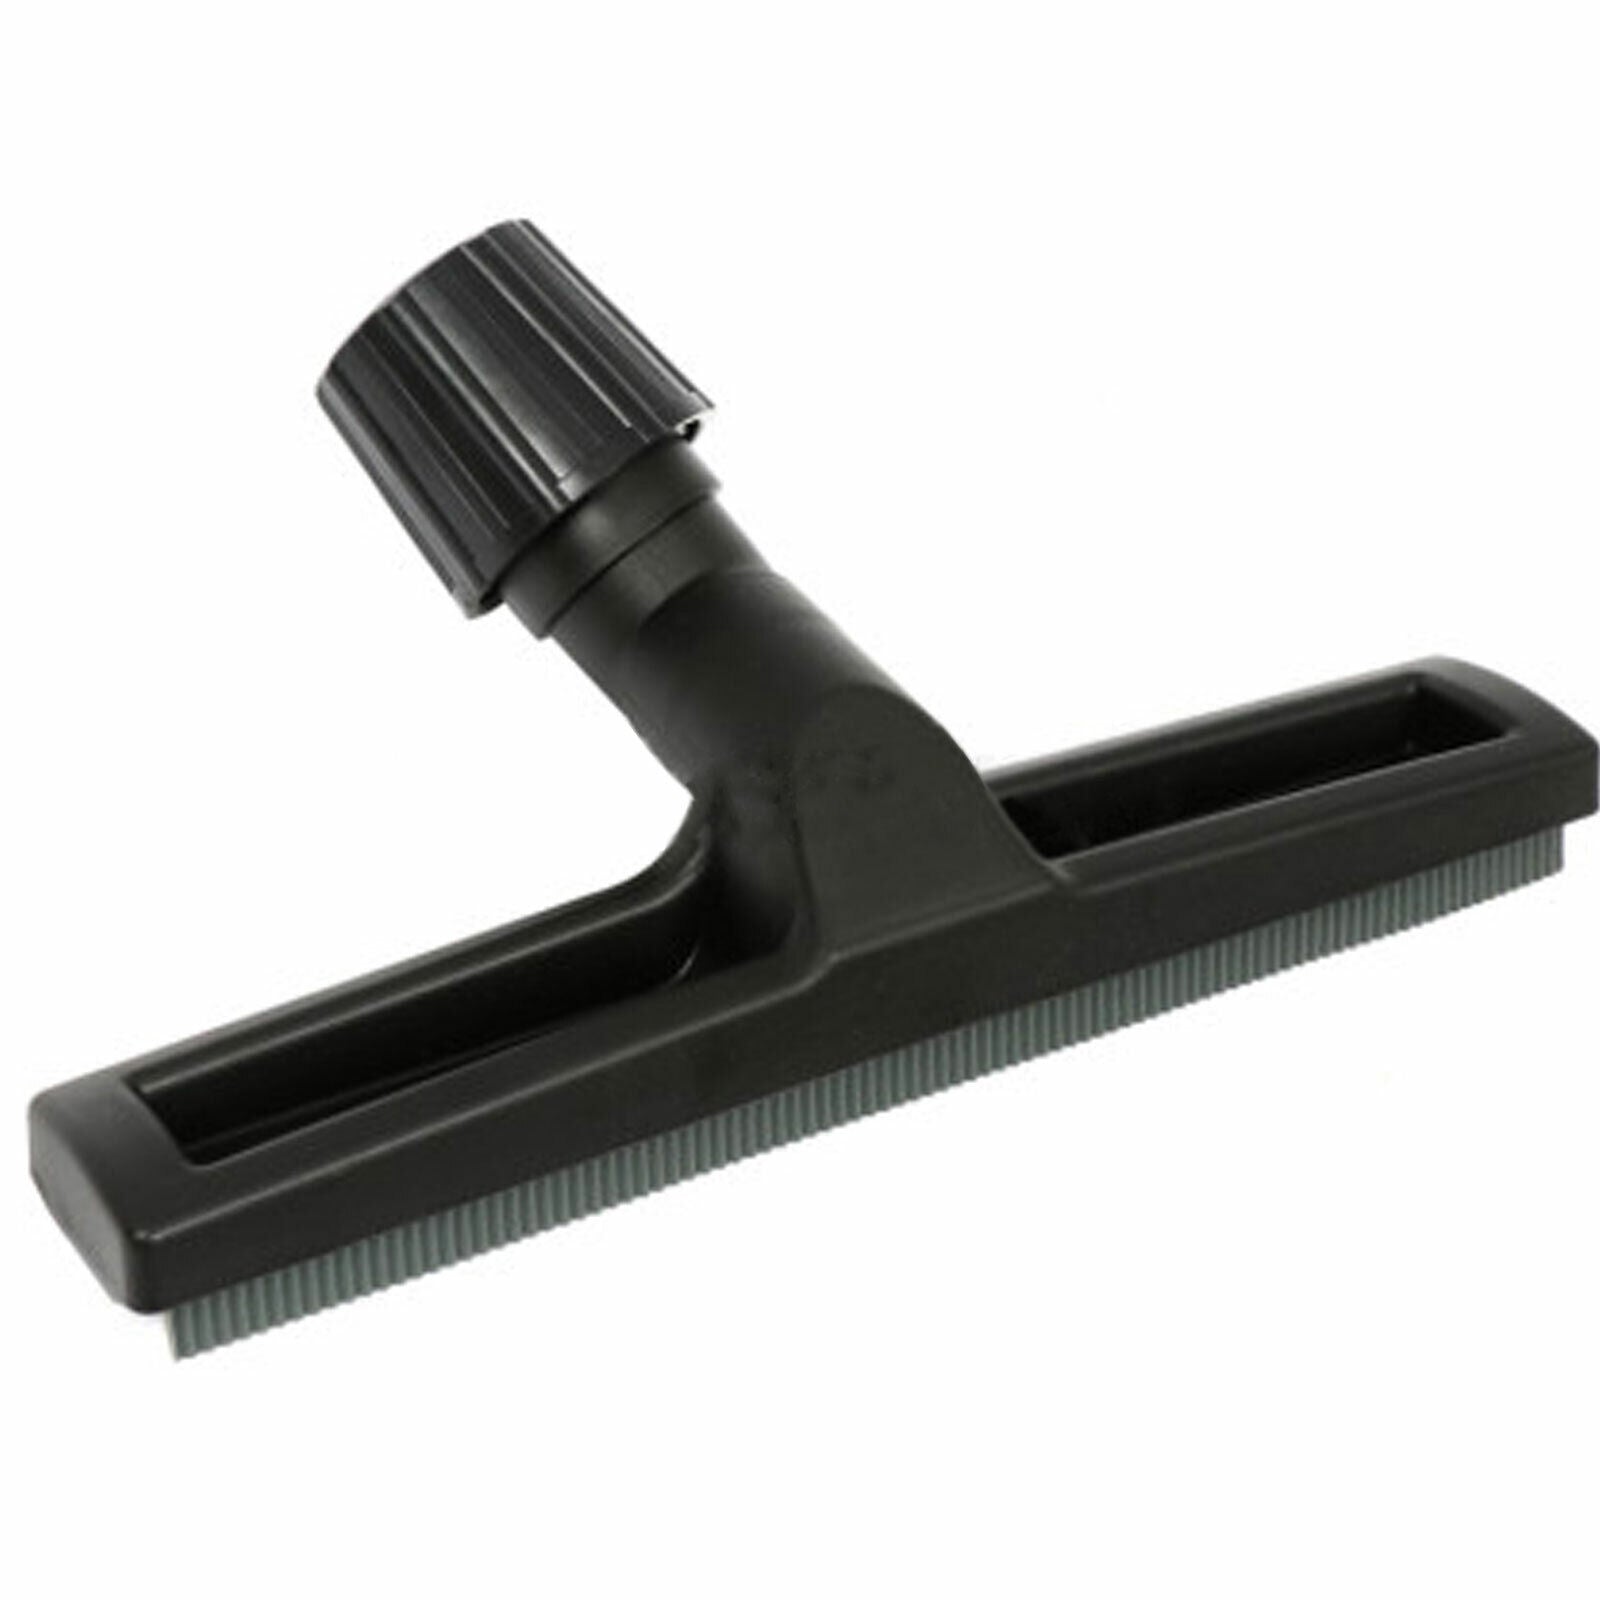 Henry Squeegee Floor Nozzle Wet Pick Up Tool for NUMATIC HENRY CHARLES GEORGE Vacuum